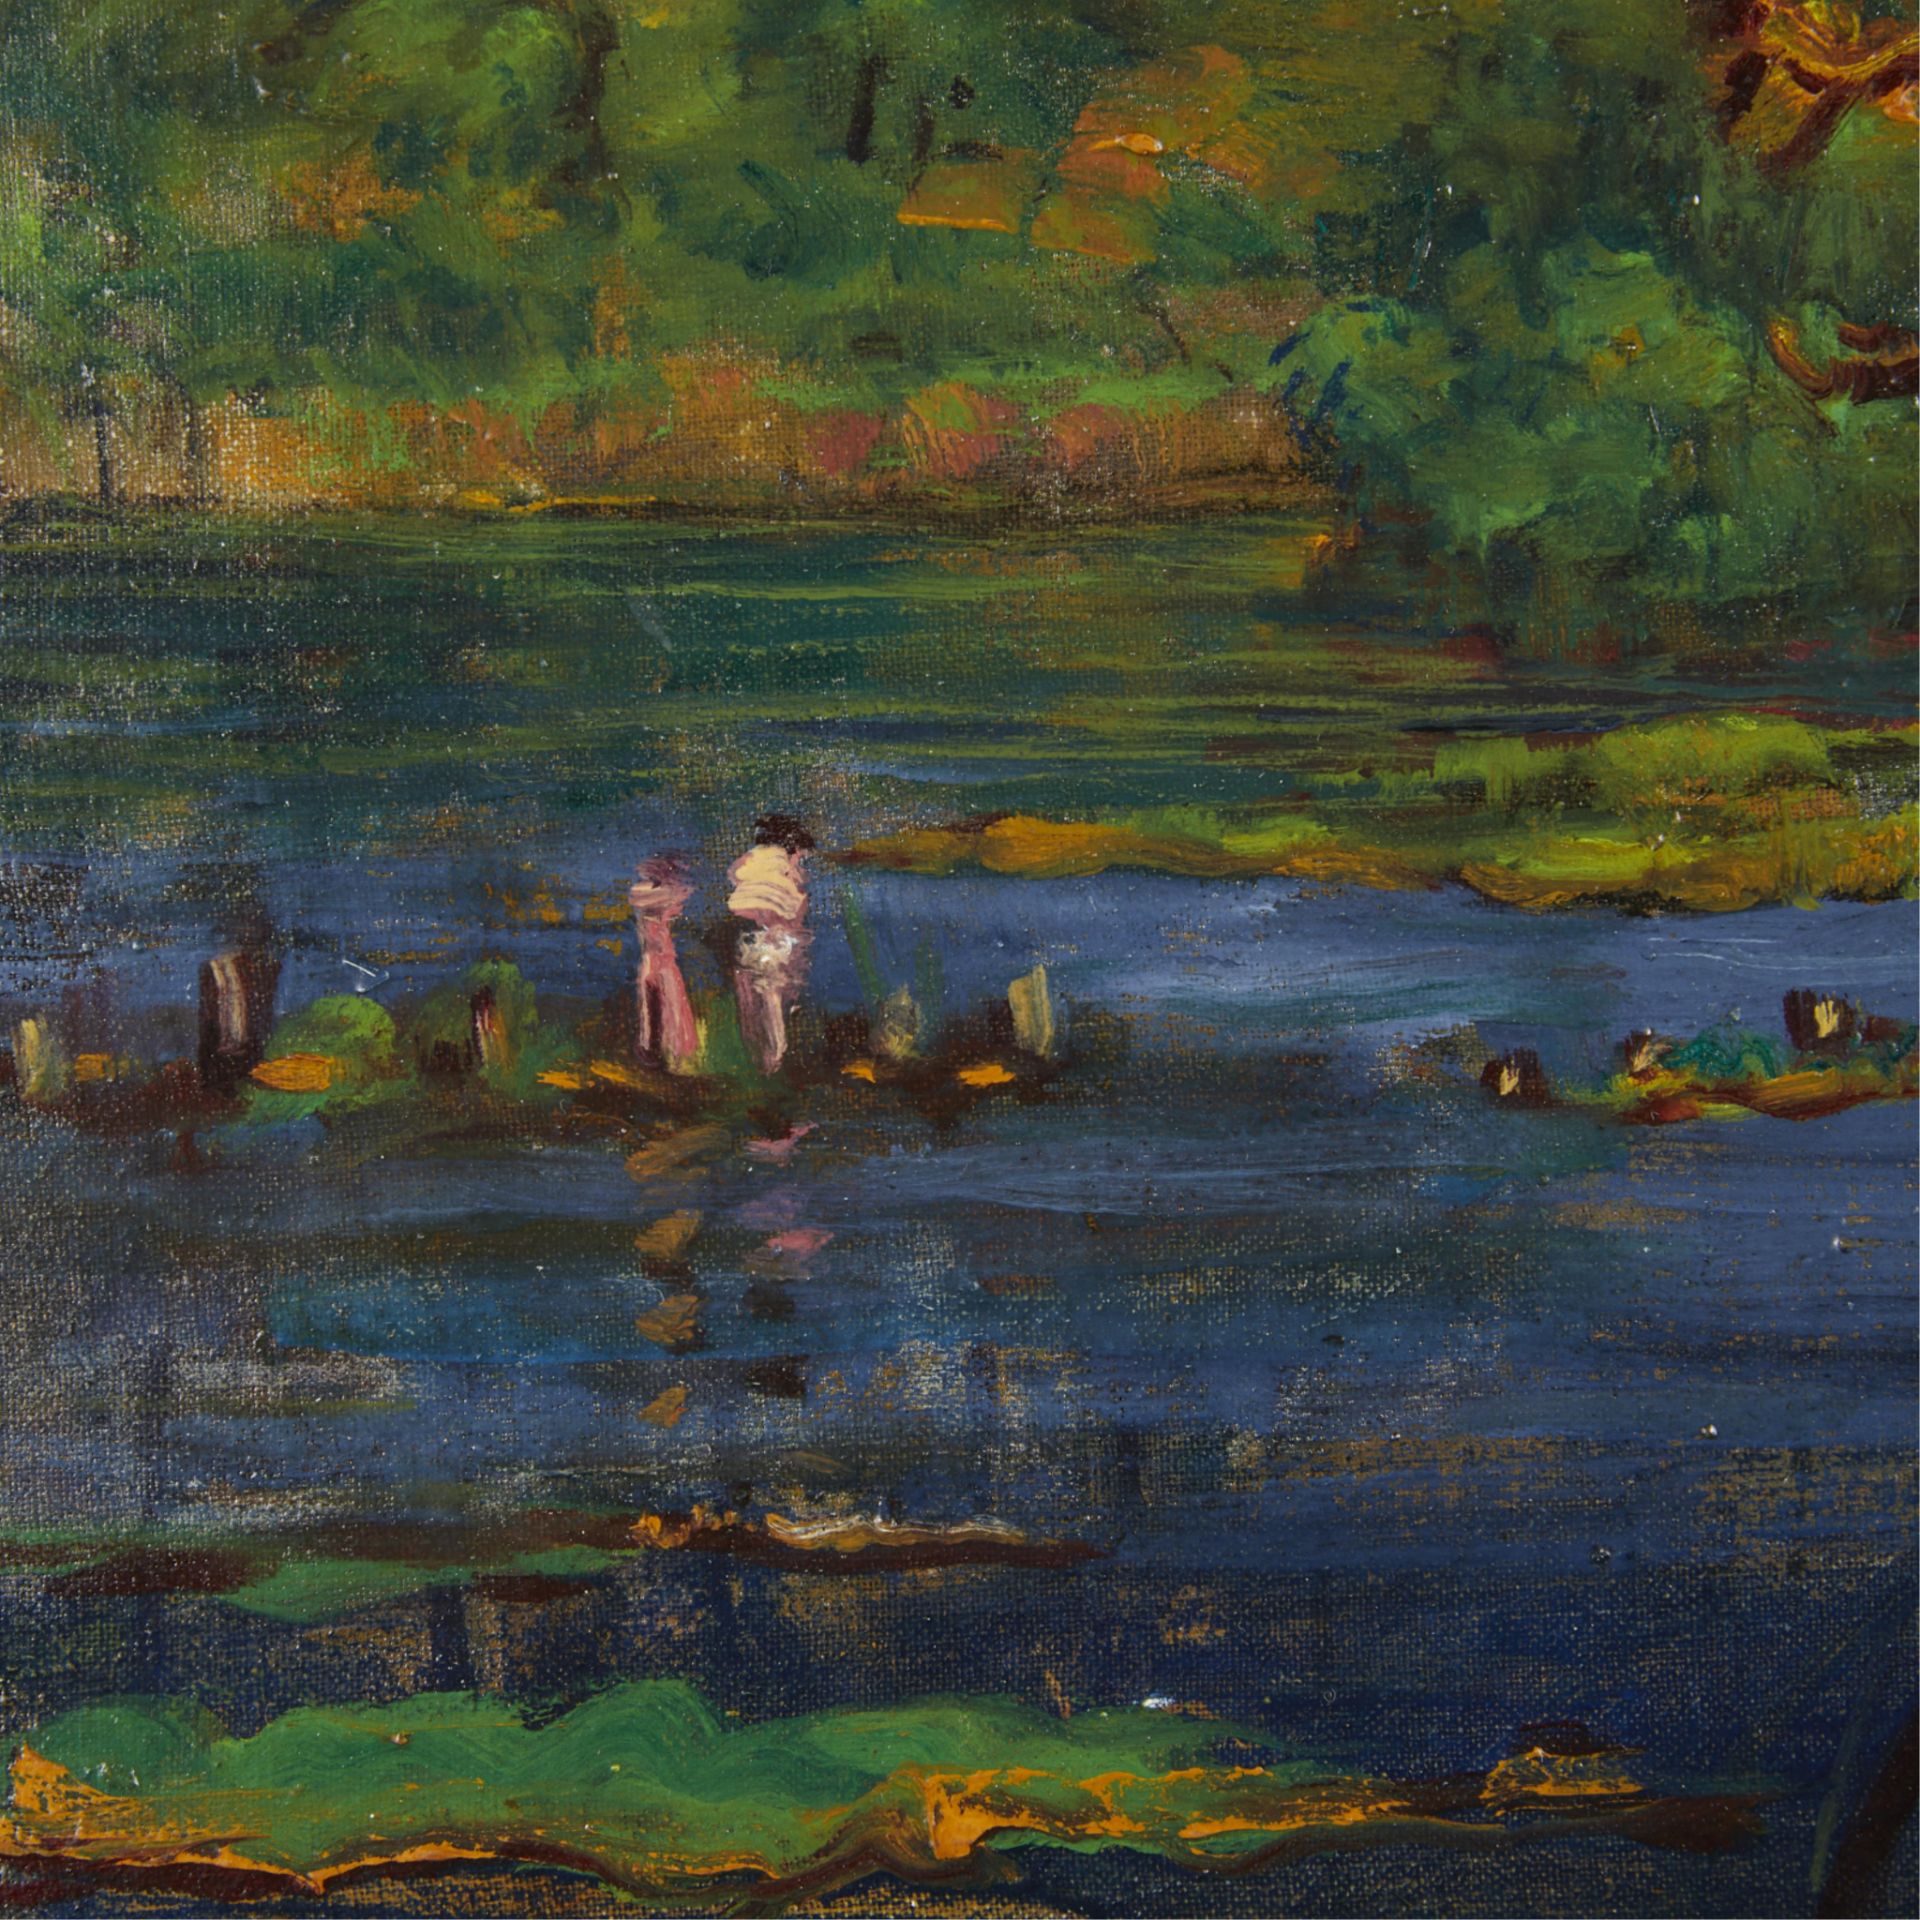 Ada Wolfe "Mississippi River - Autumn" Painting - Image 4 of 9